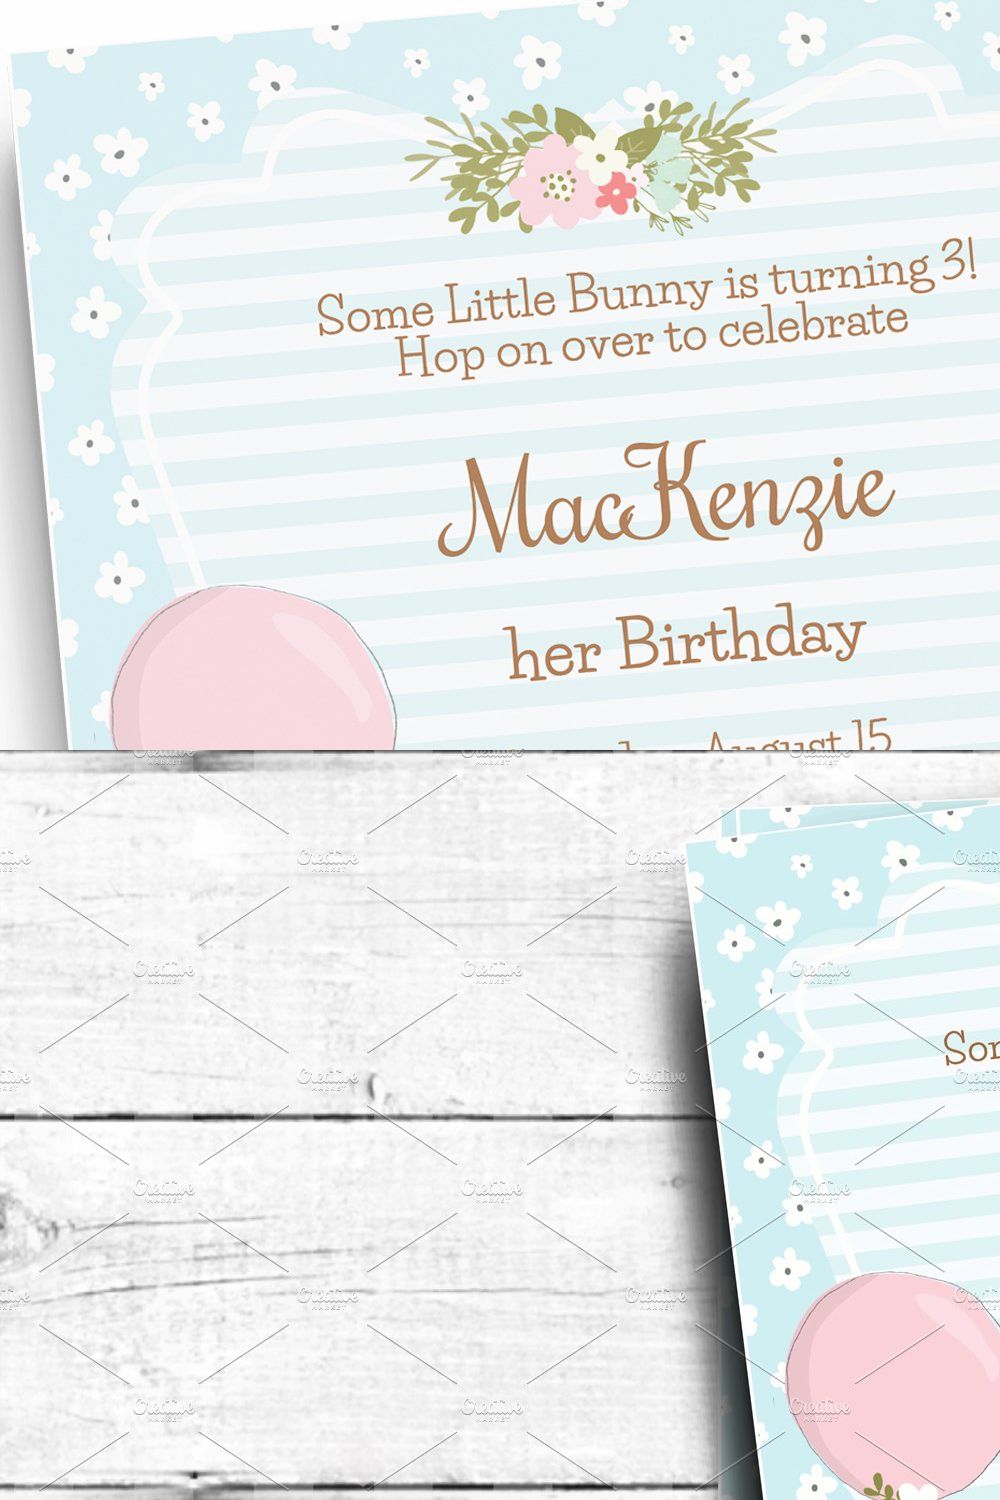 Bunny birthday party invitation pinterest preview image.